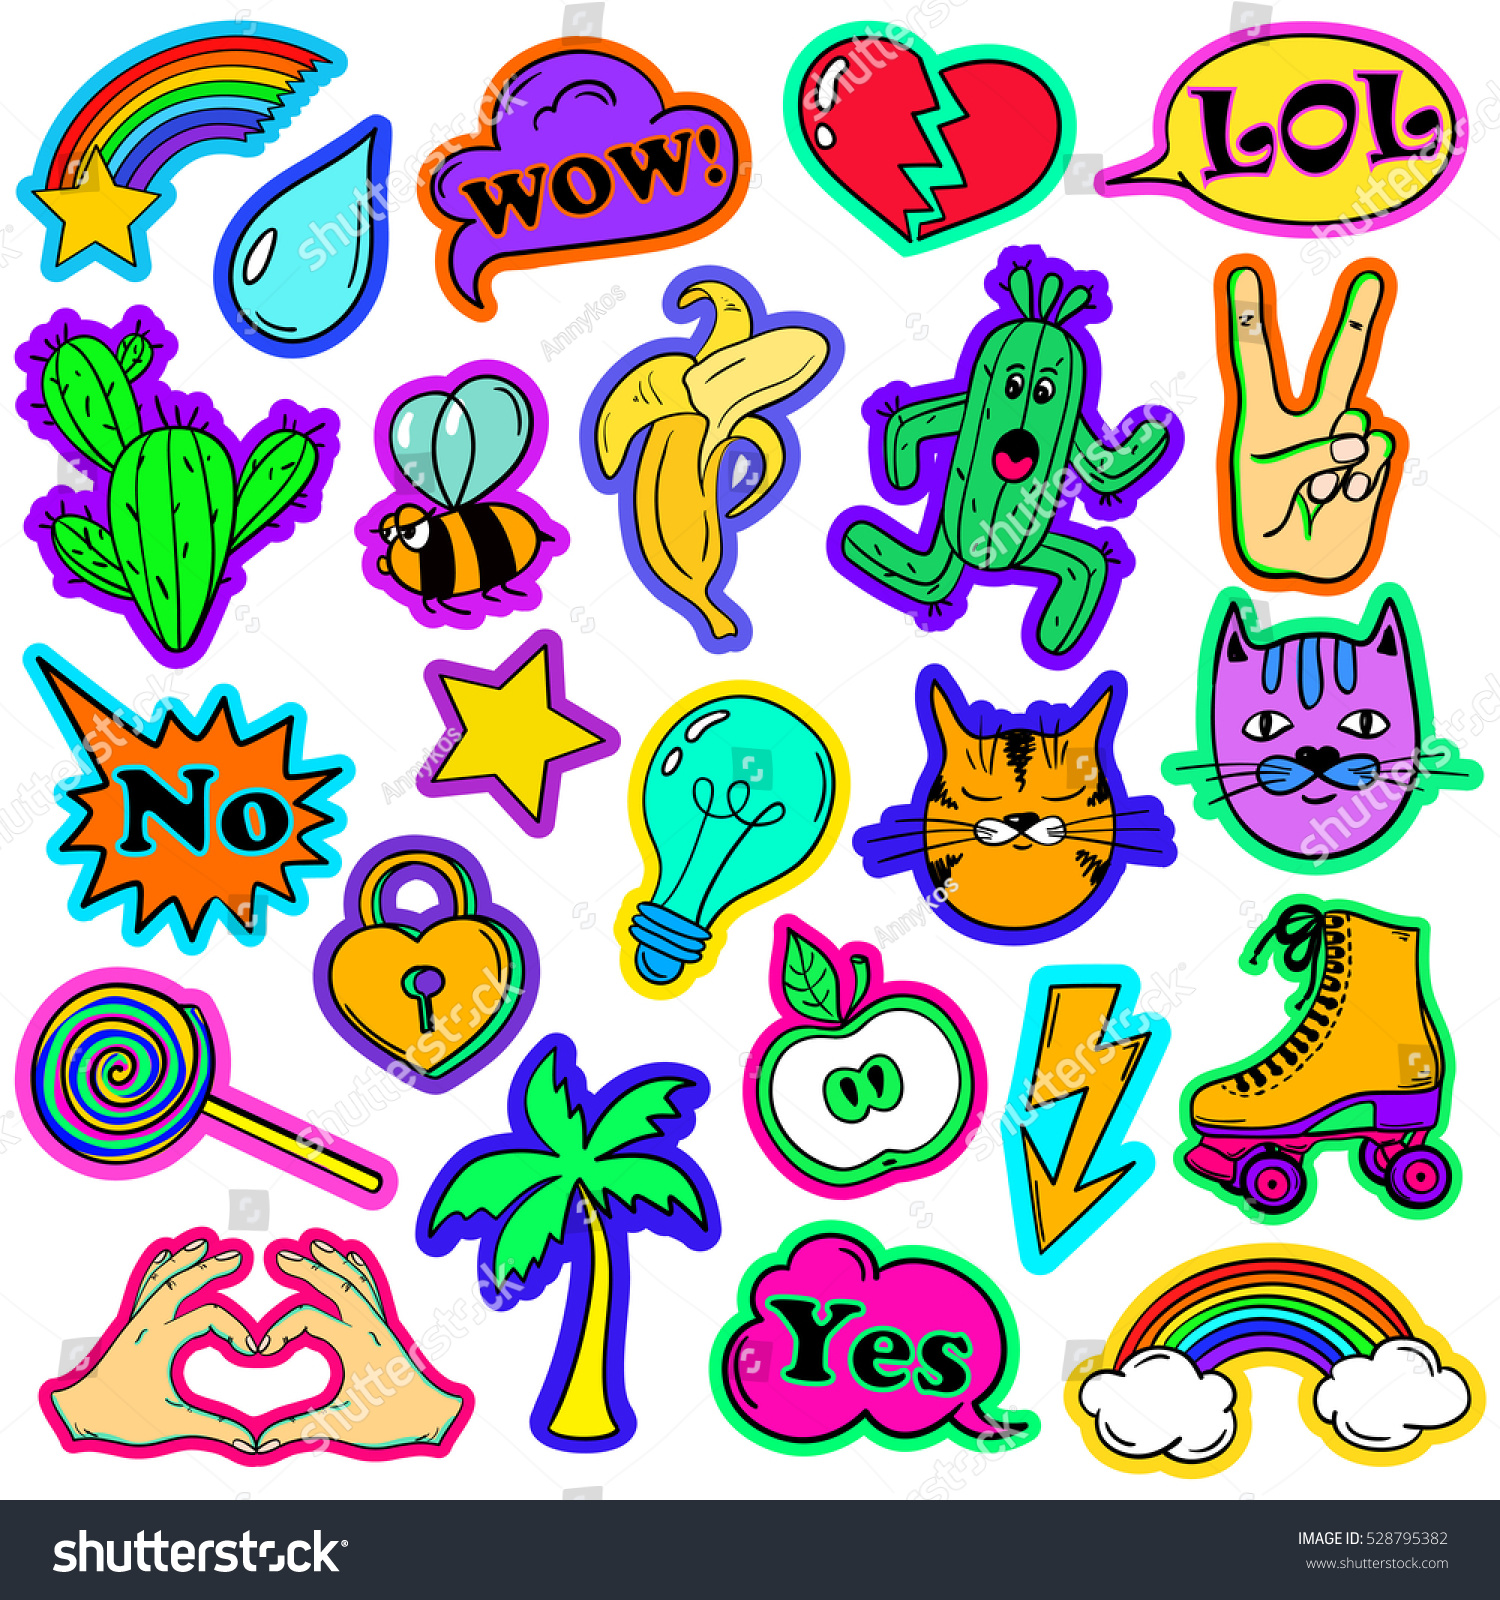 Colorful Fun Set Fashion Stickers Icons Stock Vector (Royalty Free ...